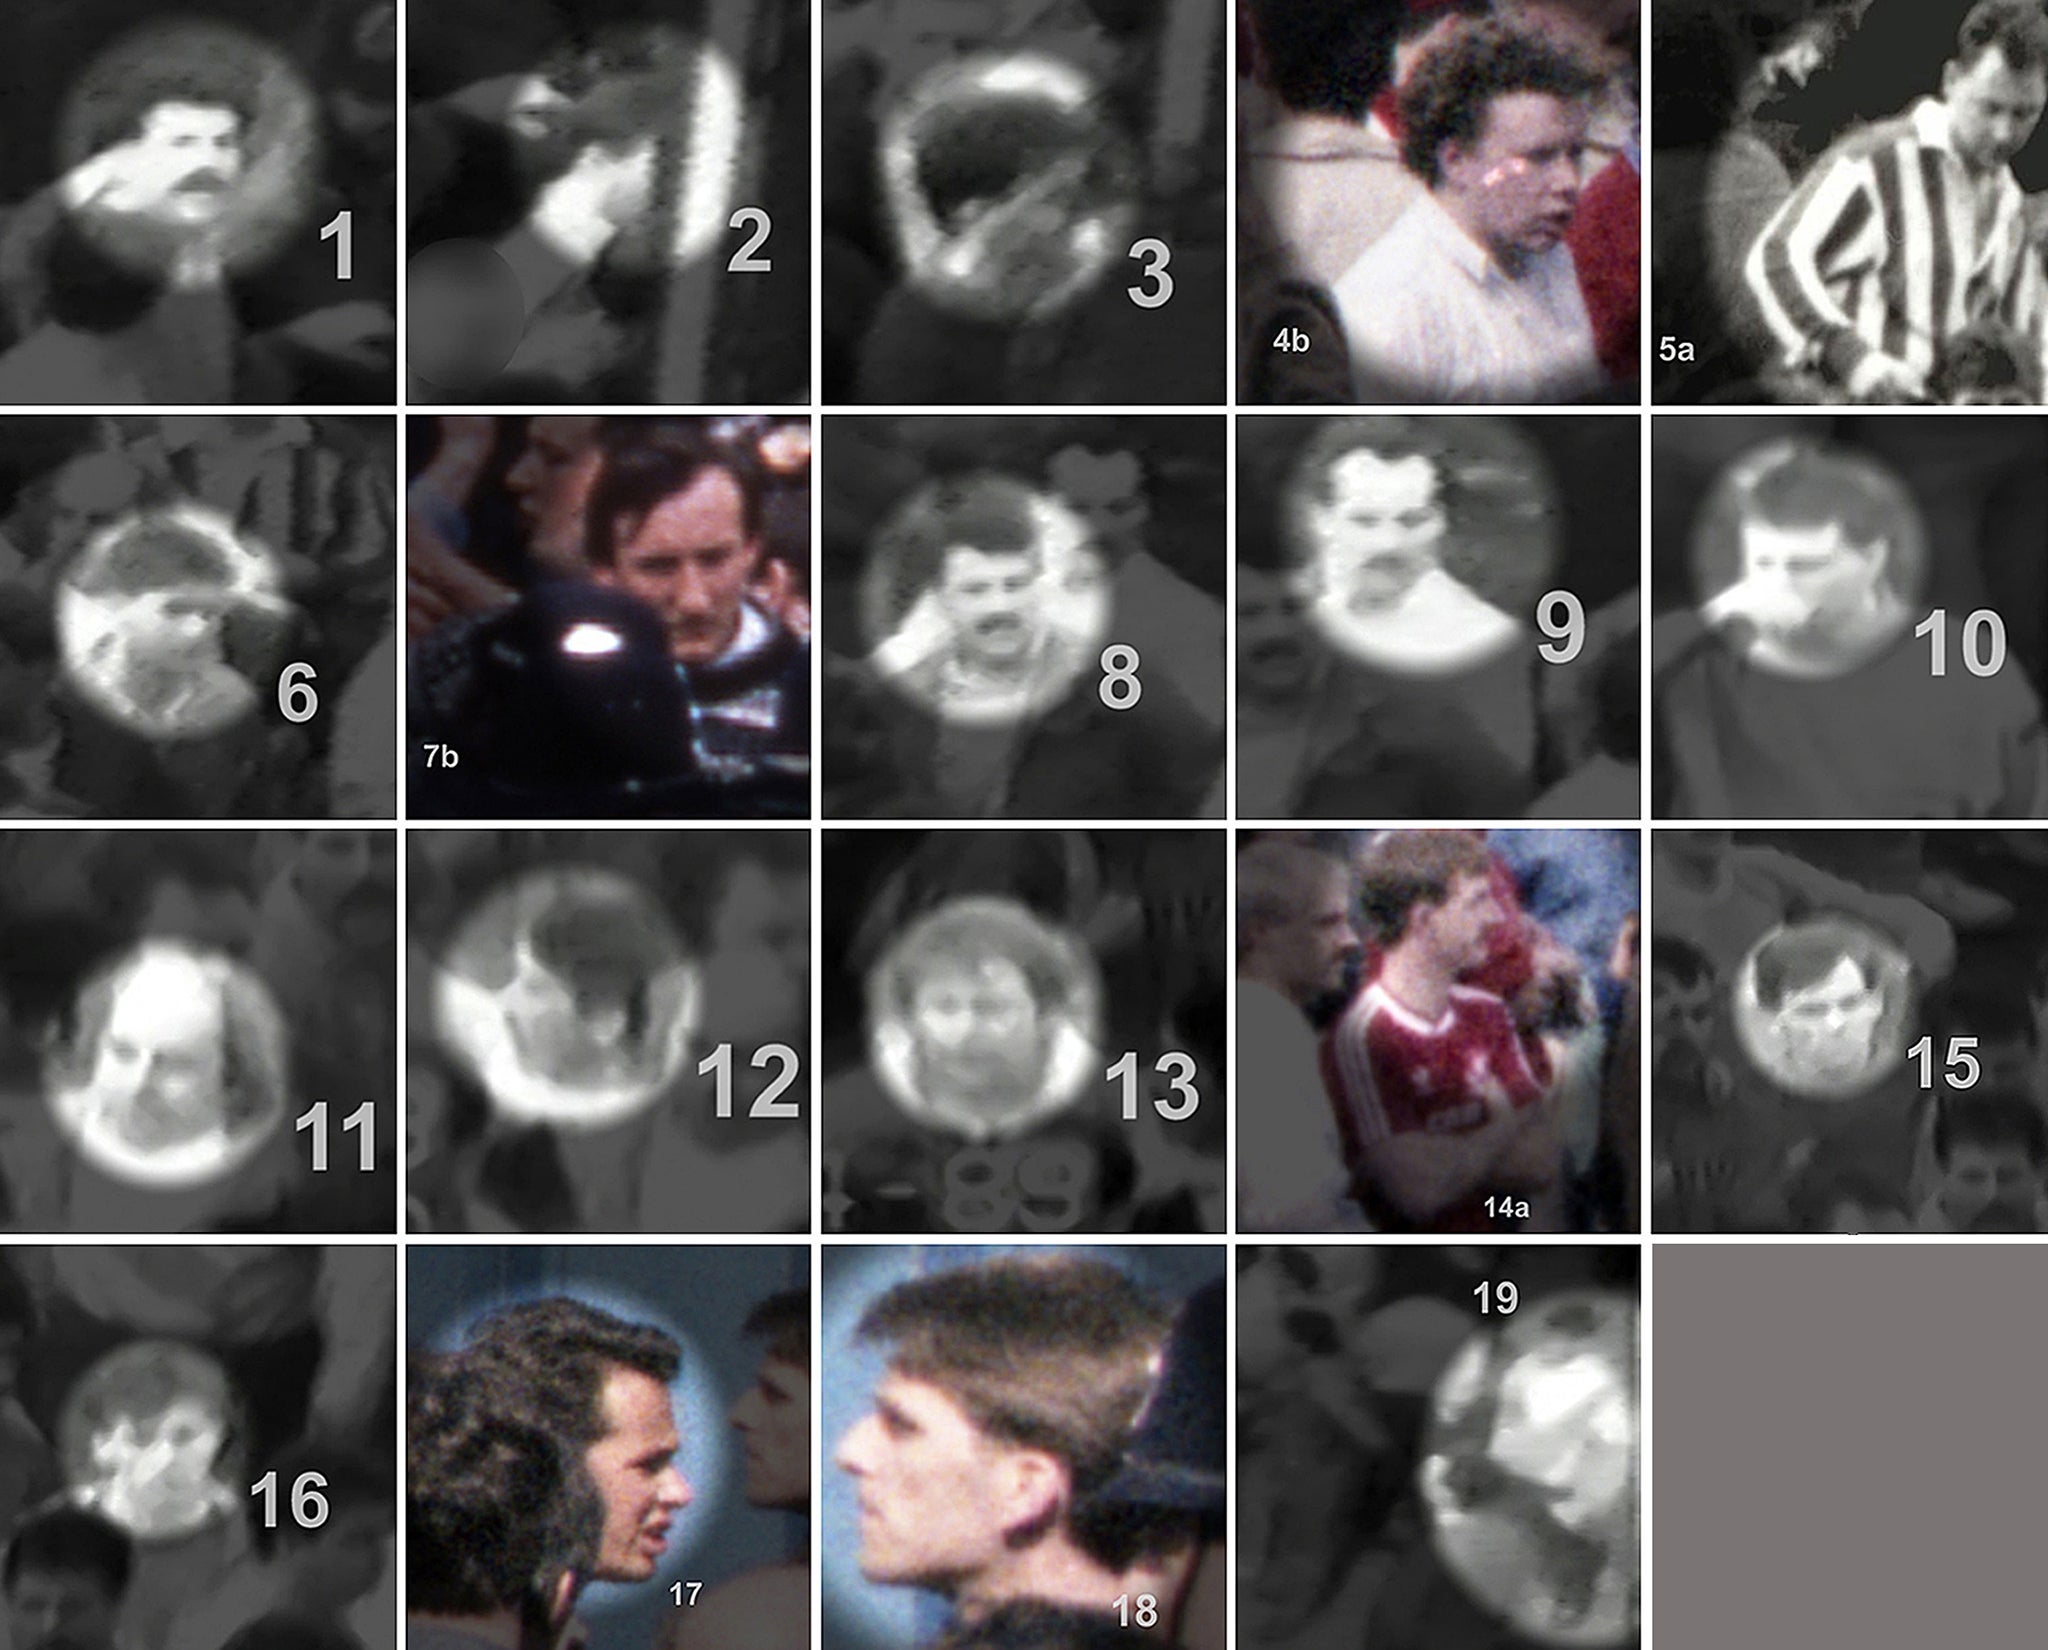 Operation Resolve has released footage and still images of 19 people they want to speak to